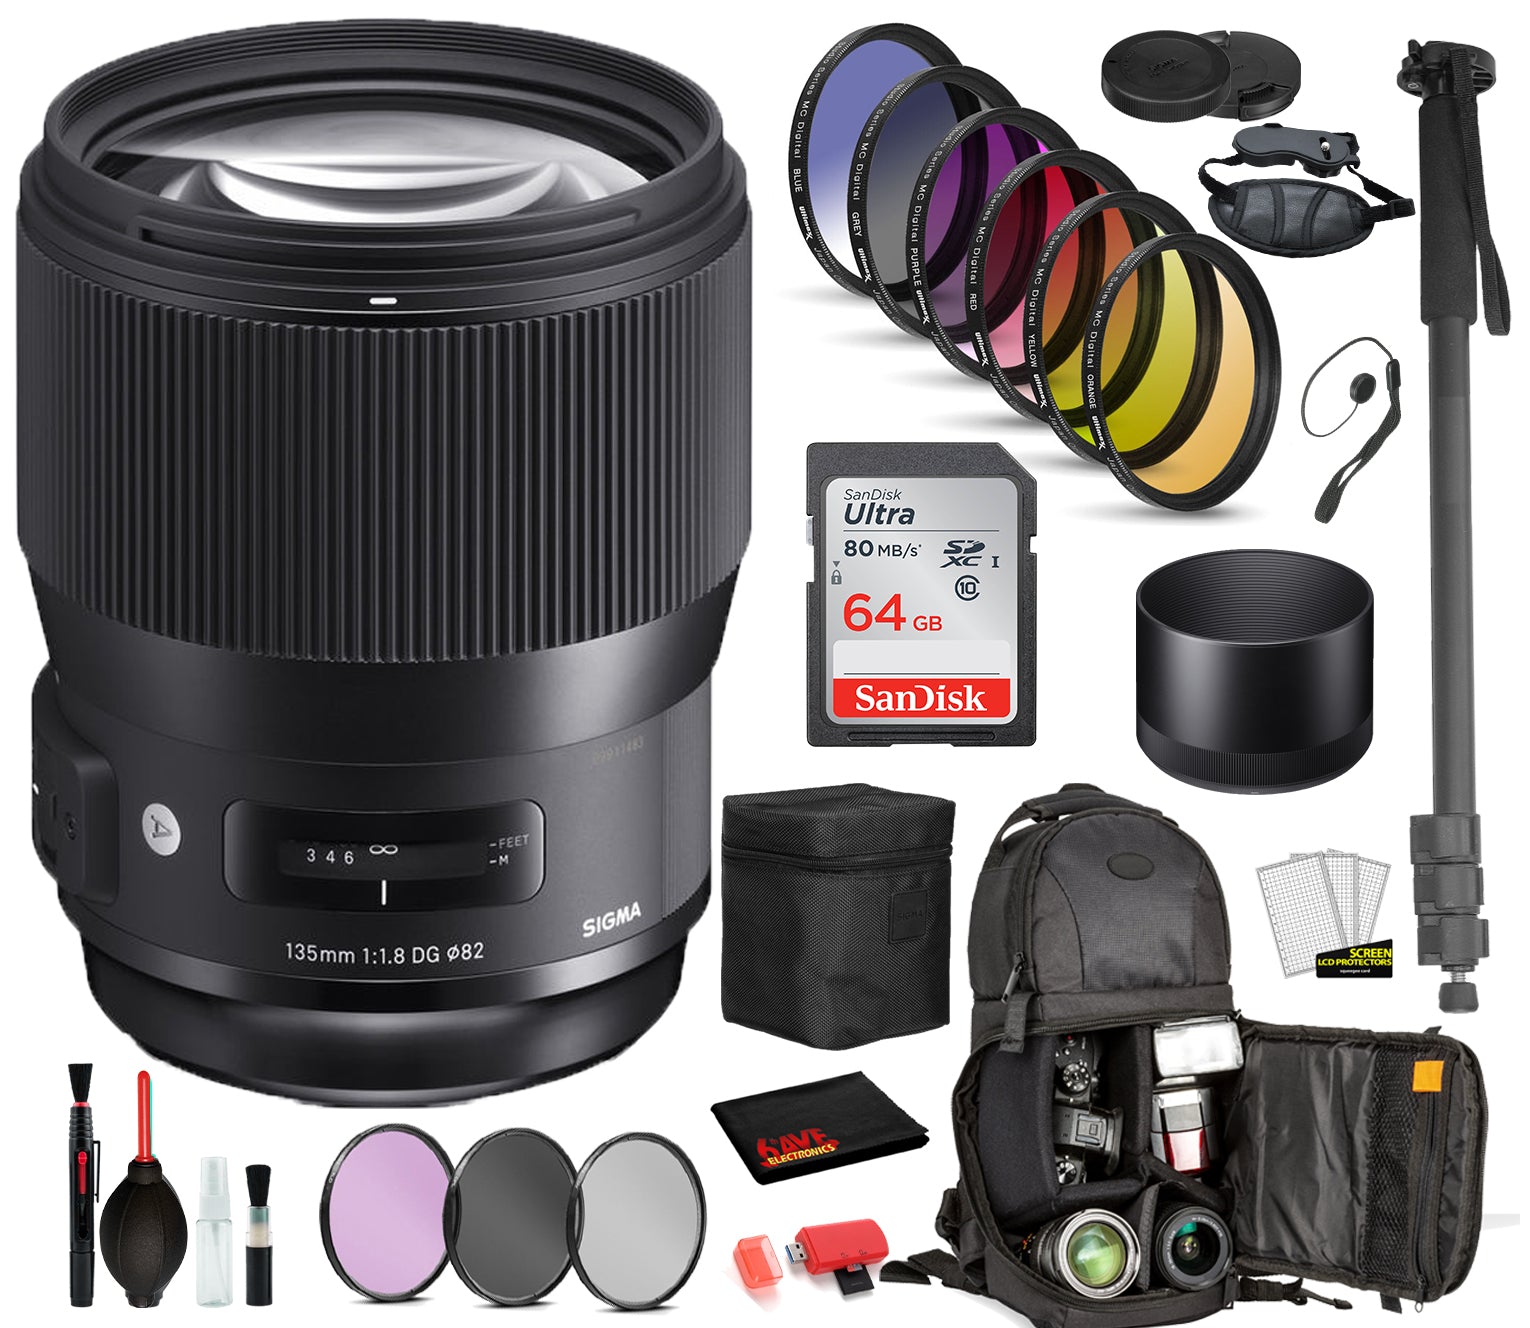 Sigma 135mm f/1.8 DG HSM Art Lens for Sony E Mount (240965) with: Sandisk 64gb SD Card, 9PC Filter Kit + More